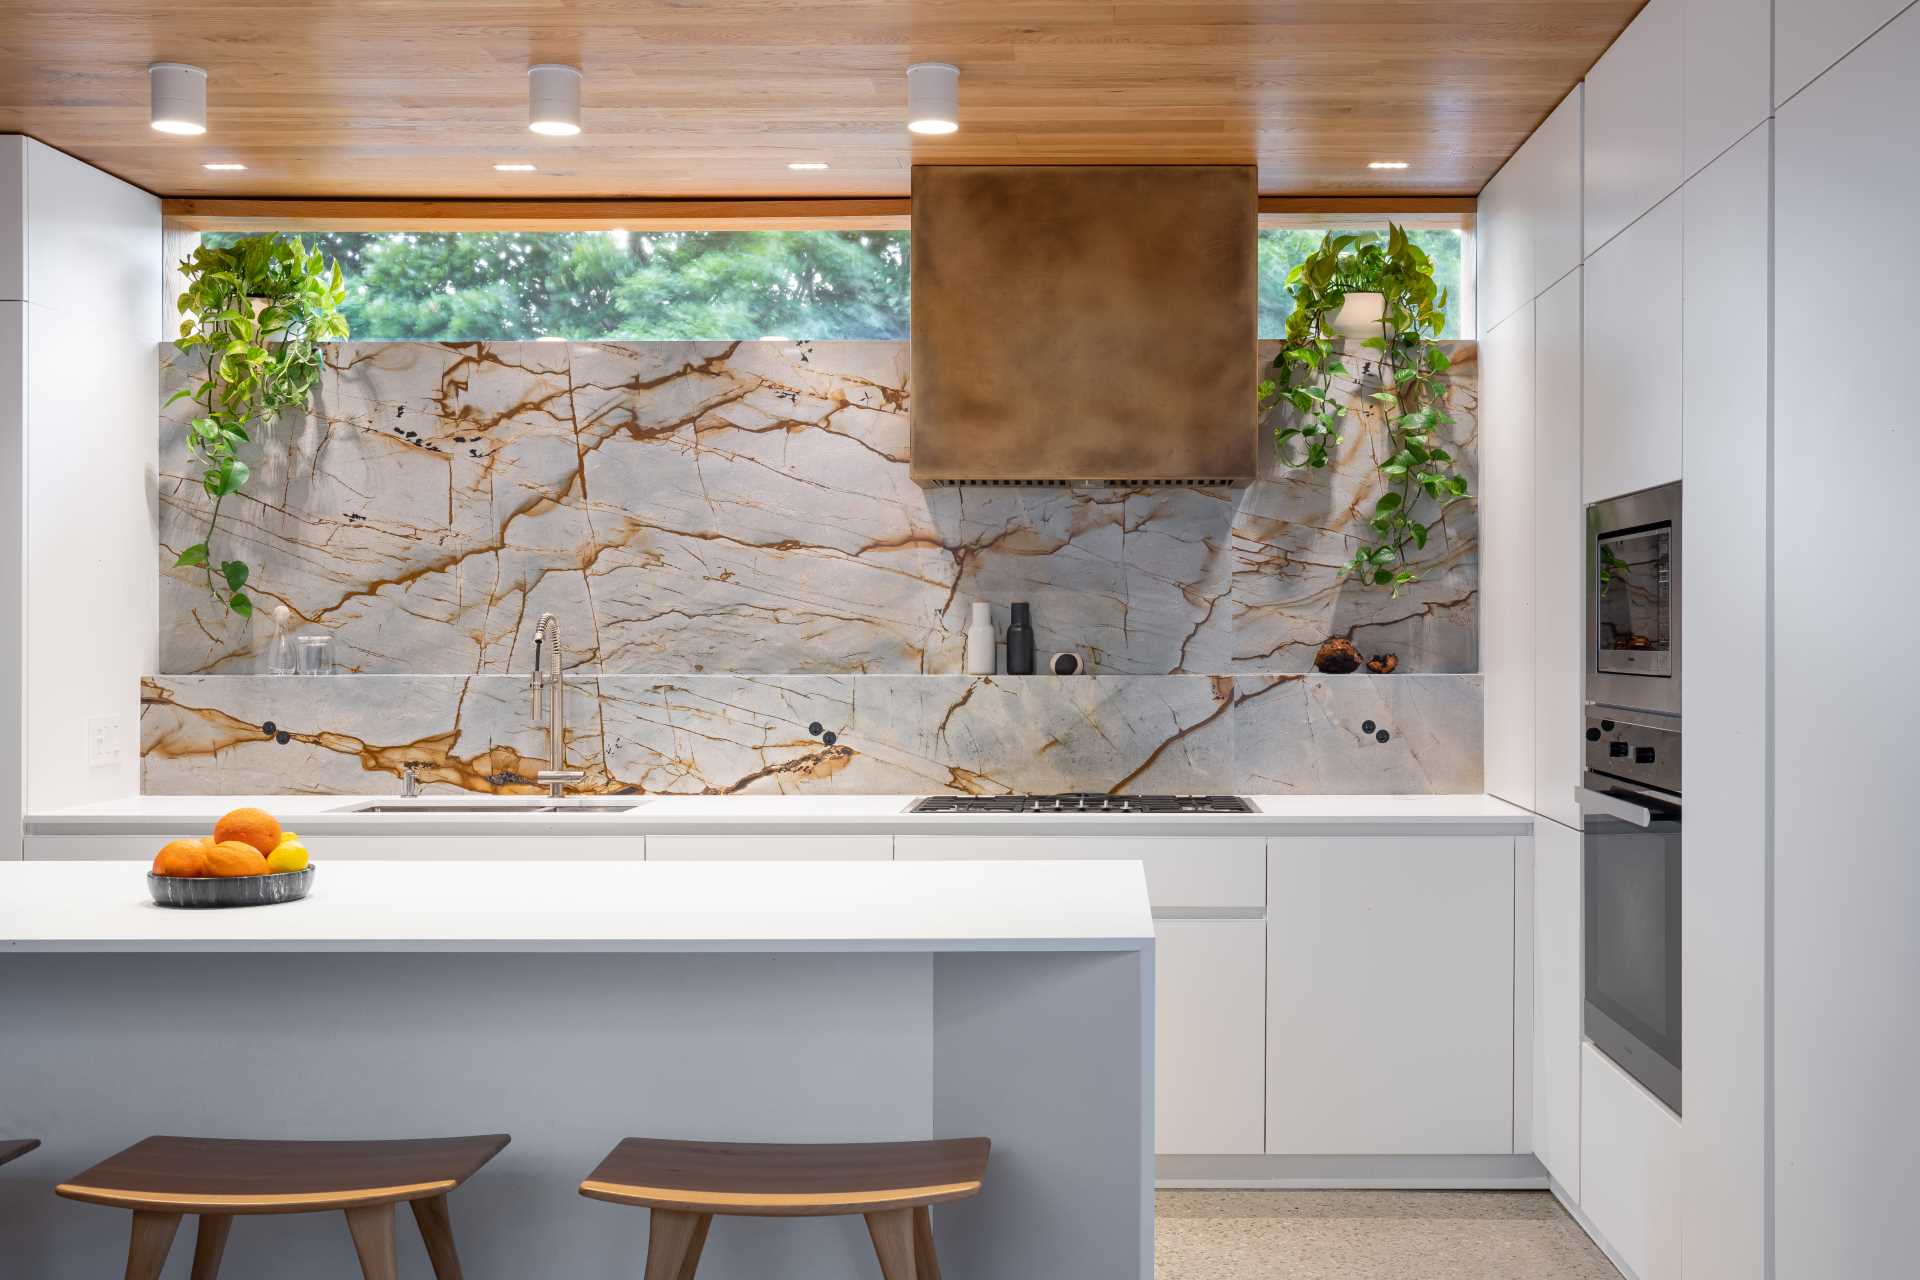 In the kitchen, a stone backsplash continues up the wall, while a window at the top adds natural light, and minimalist white cabinetry features throughout.